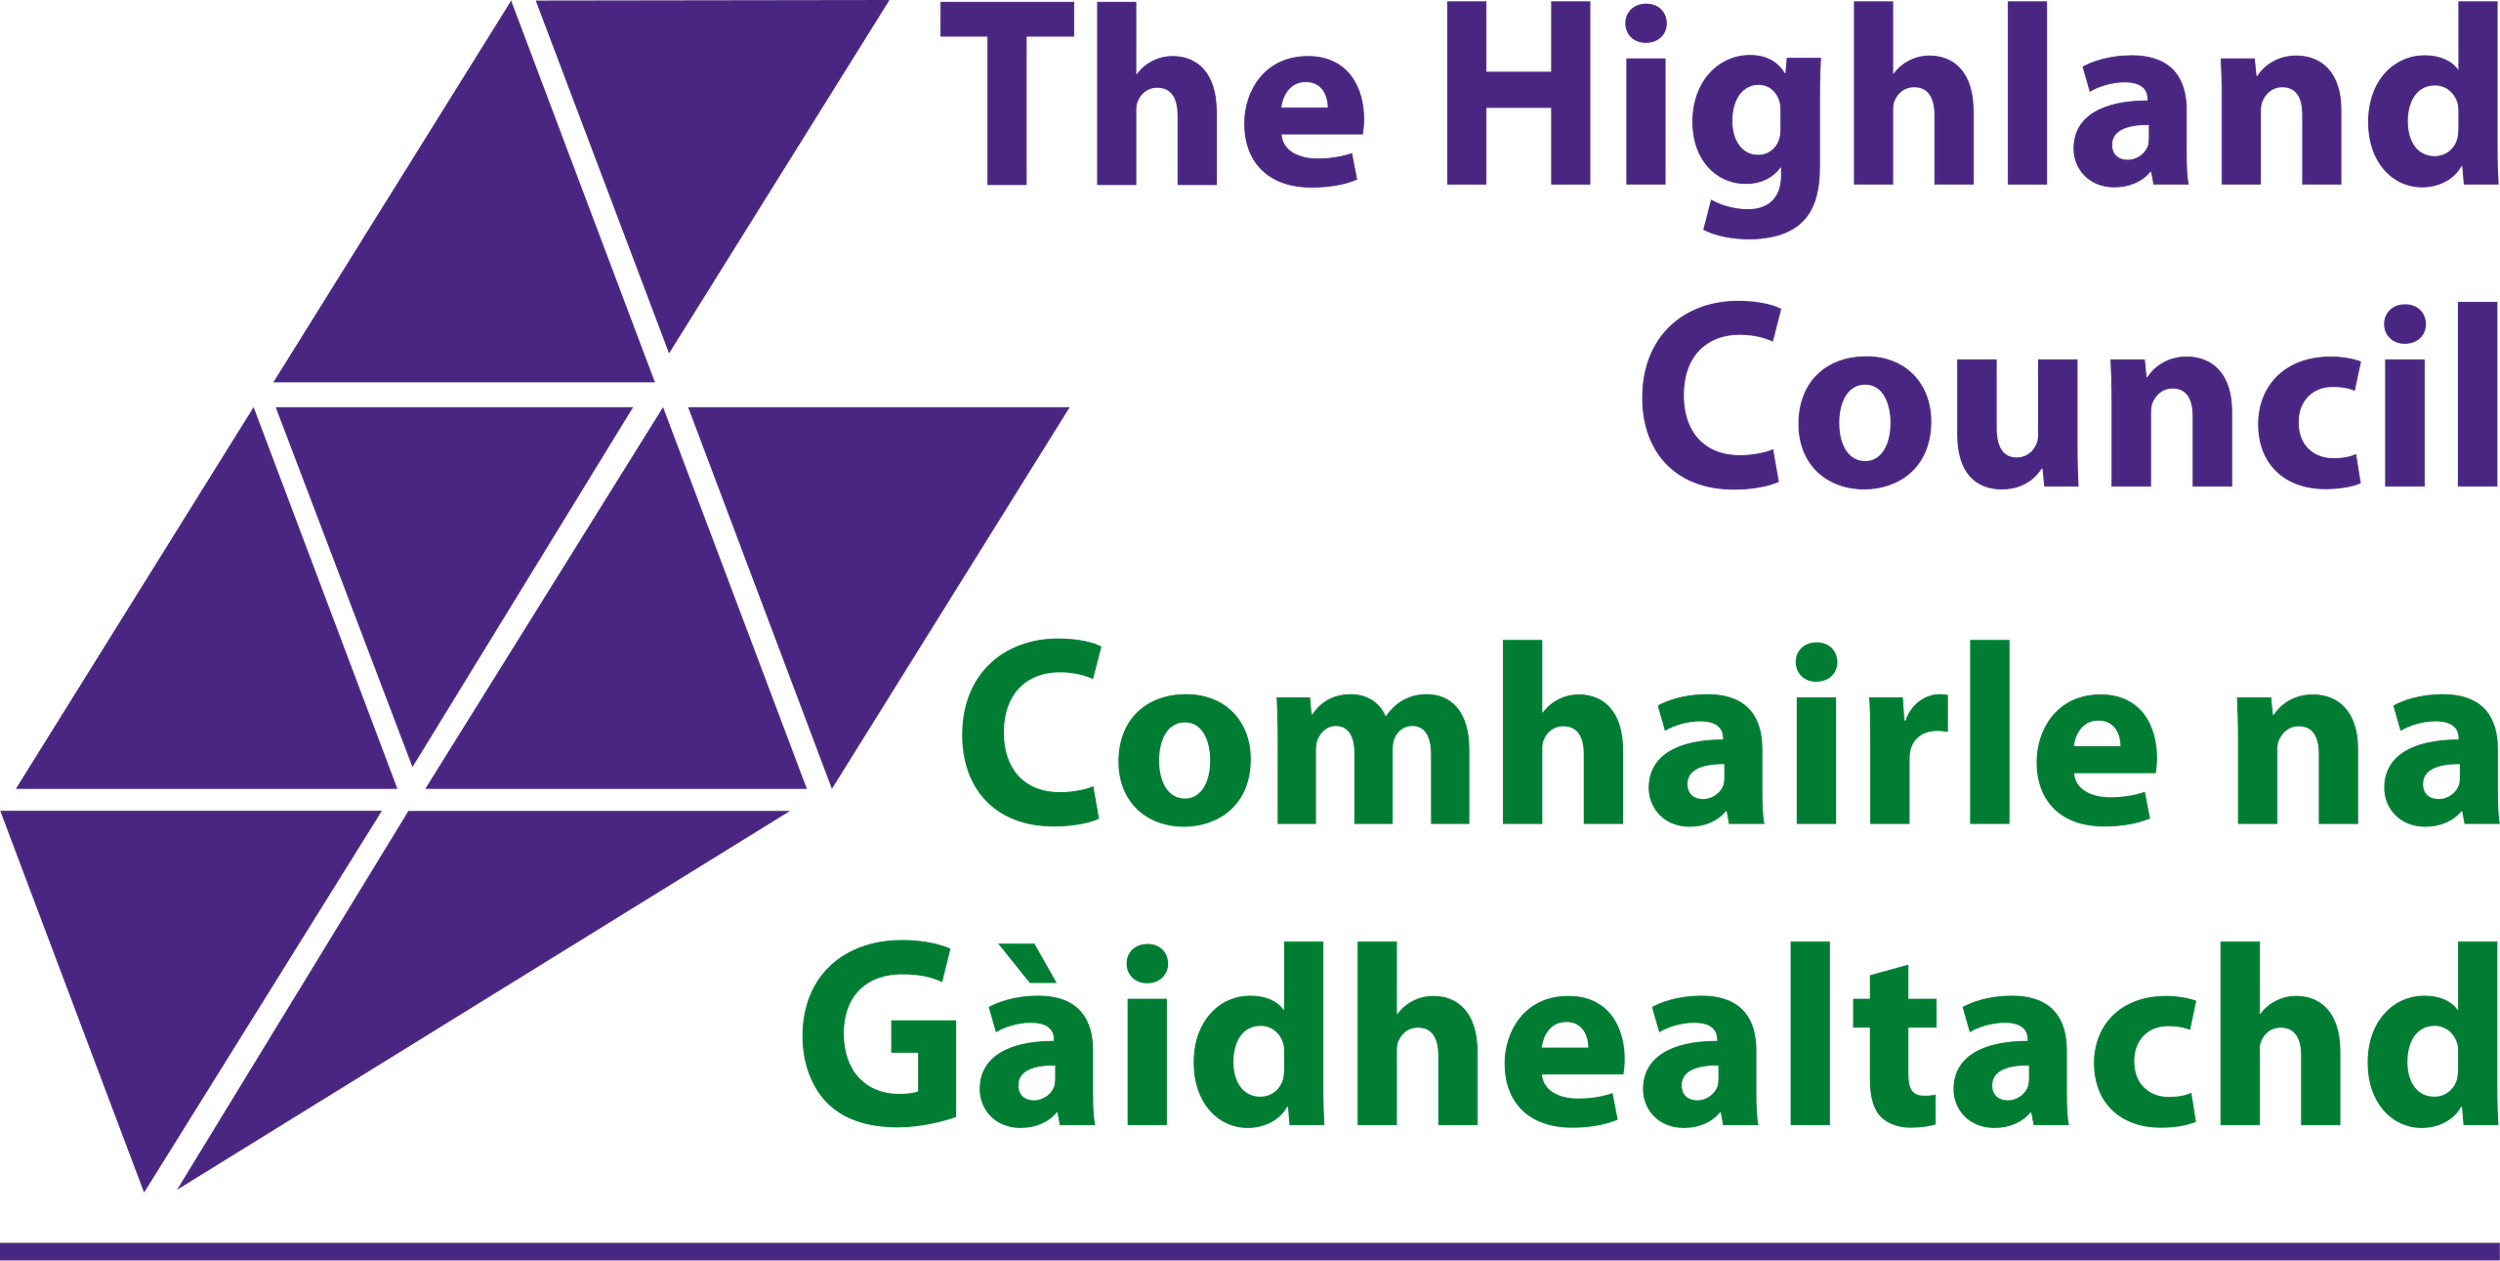 The_Highland_Council_(2019).svg.png